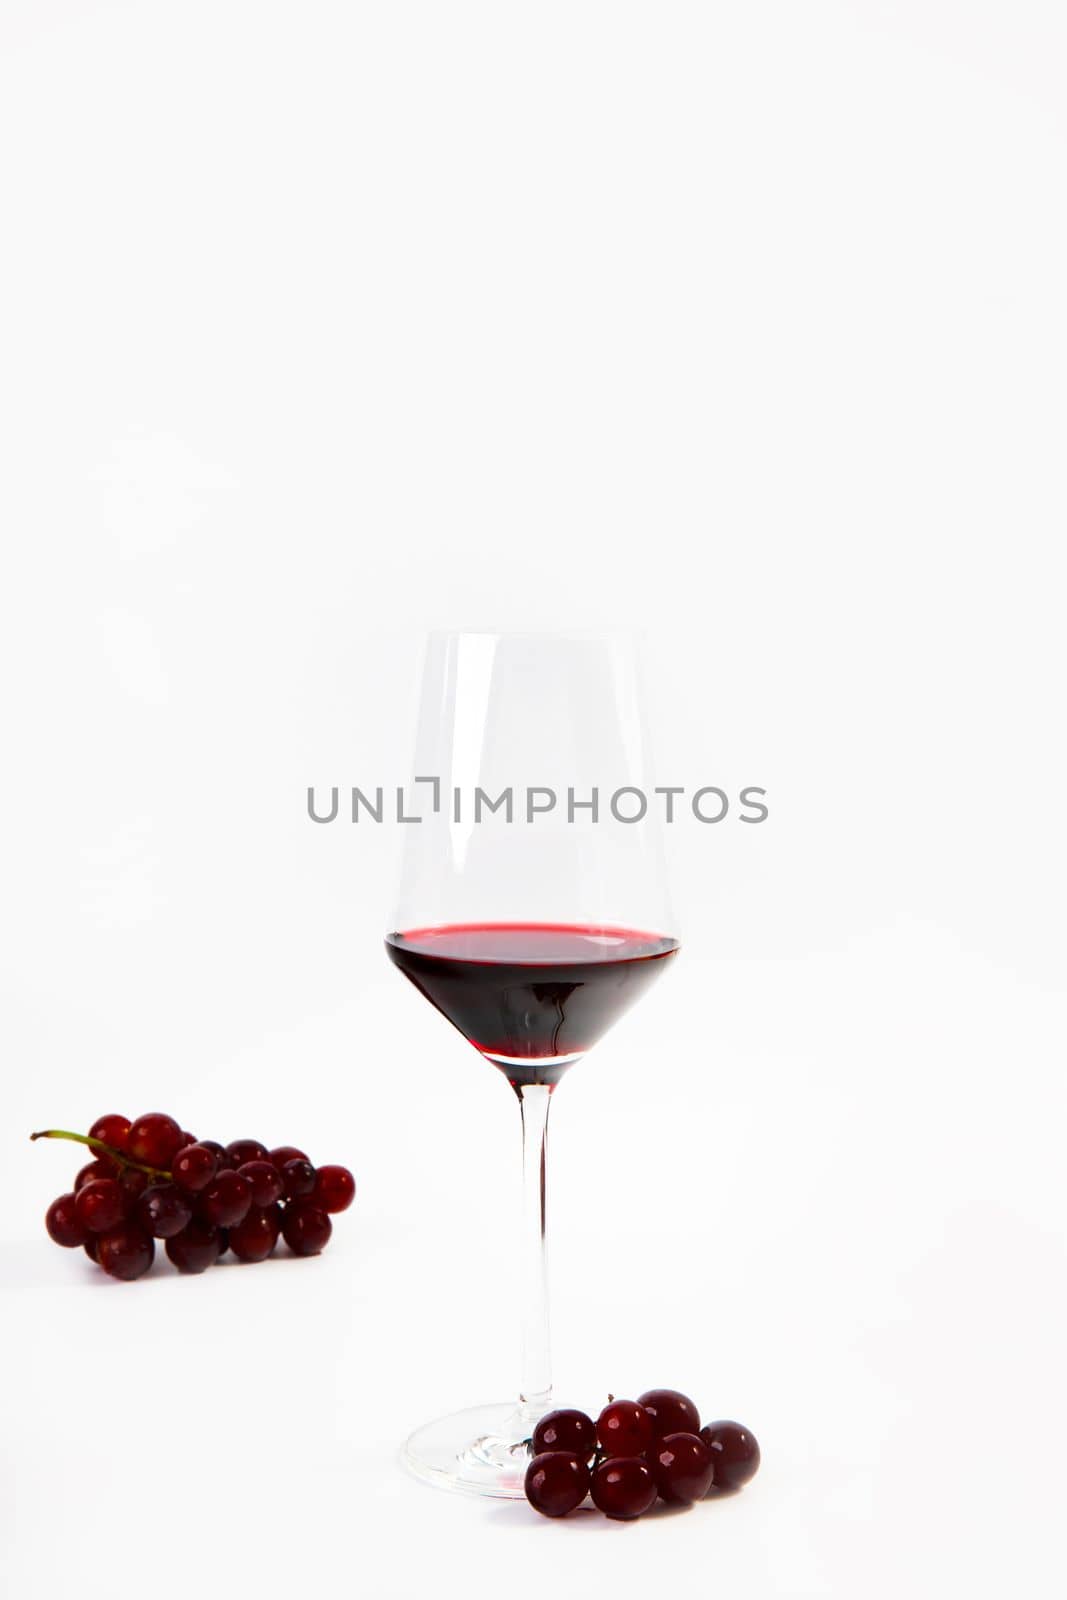 Wine glass with a splash of red wine and grapes isolated on white background copy space luxury